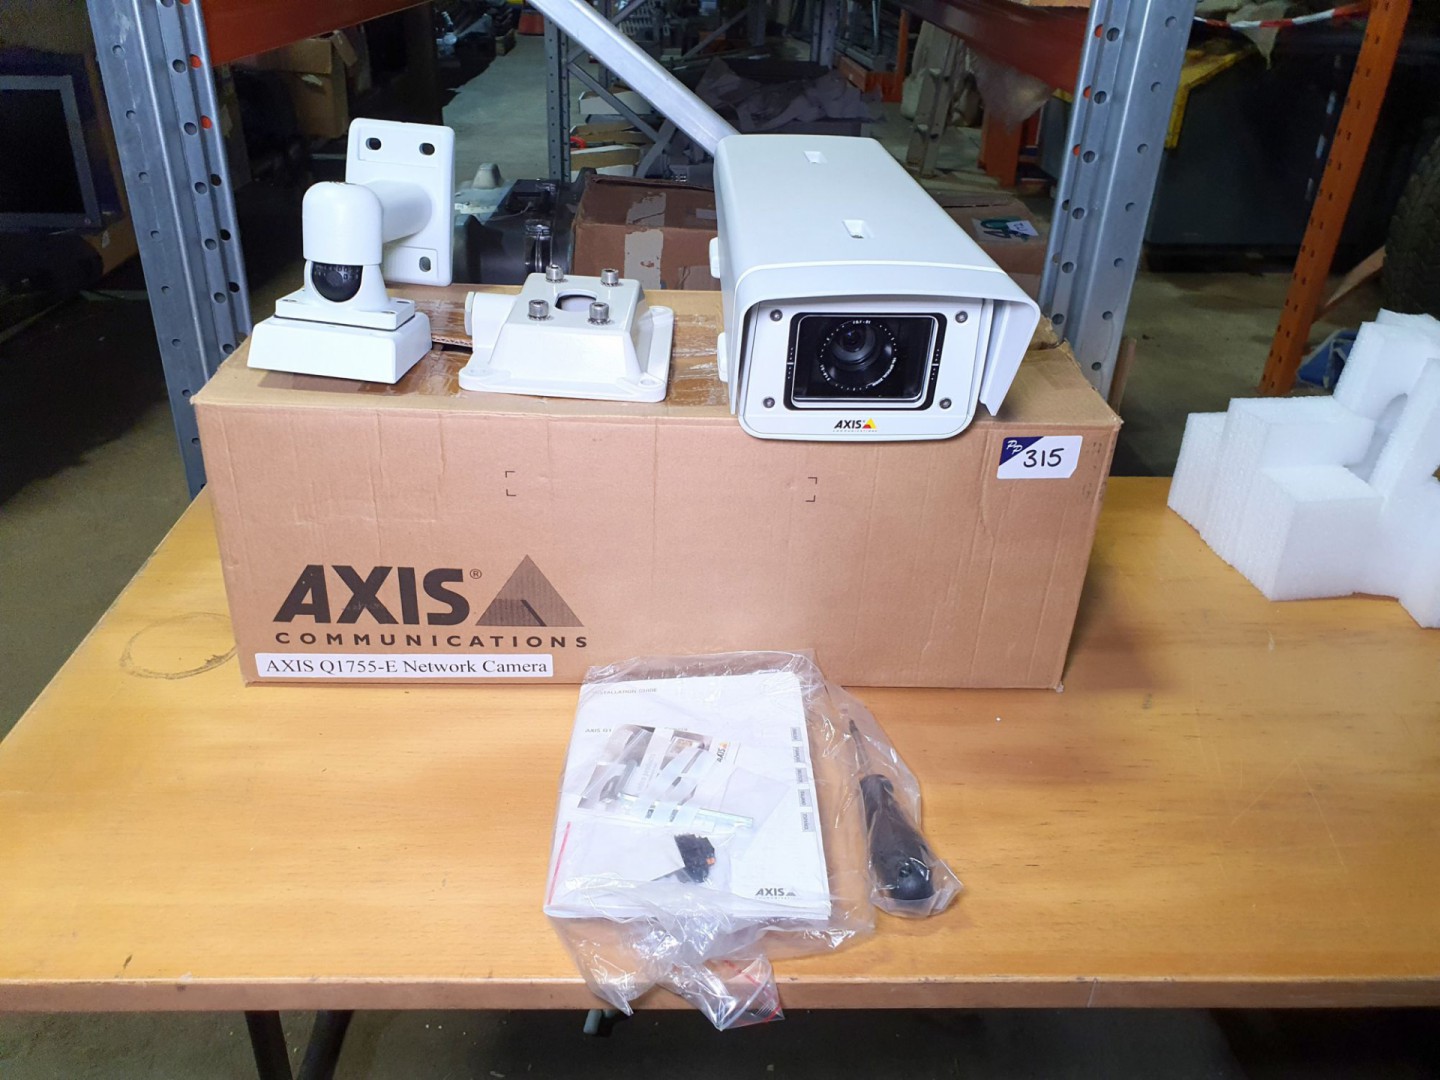 AXIS Q1755-E outdoor-ready HDTV Network Camera wit...